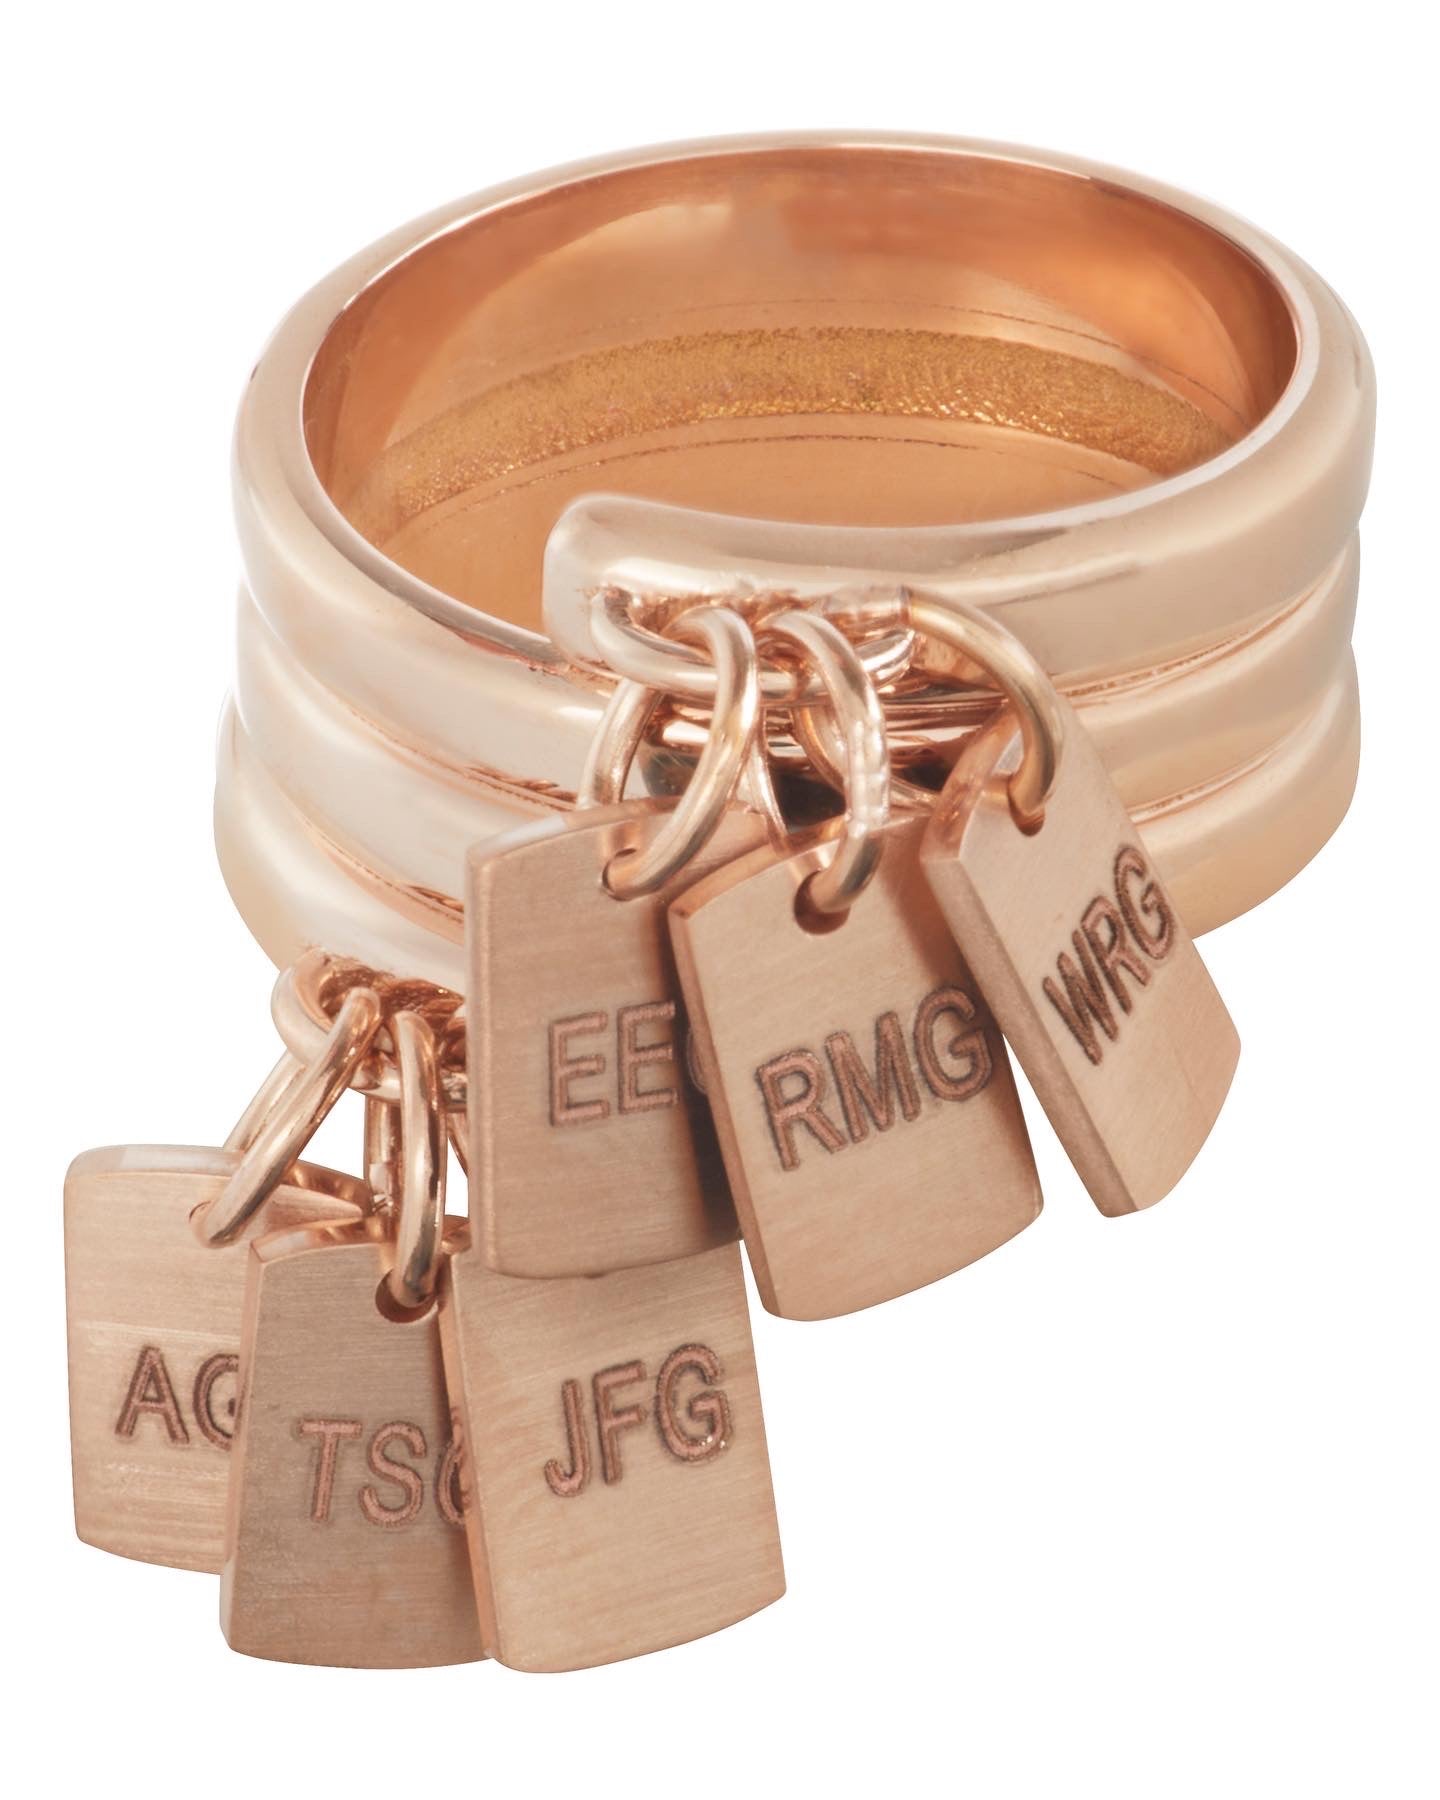 Keep Your Loved Ones Close with Design Letters Jewelry